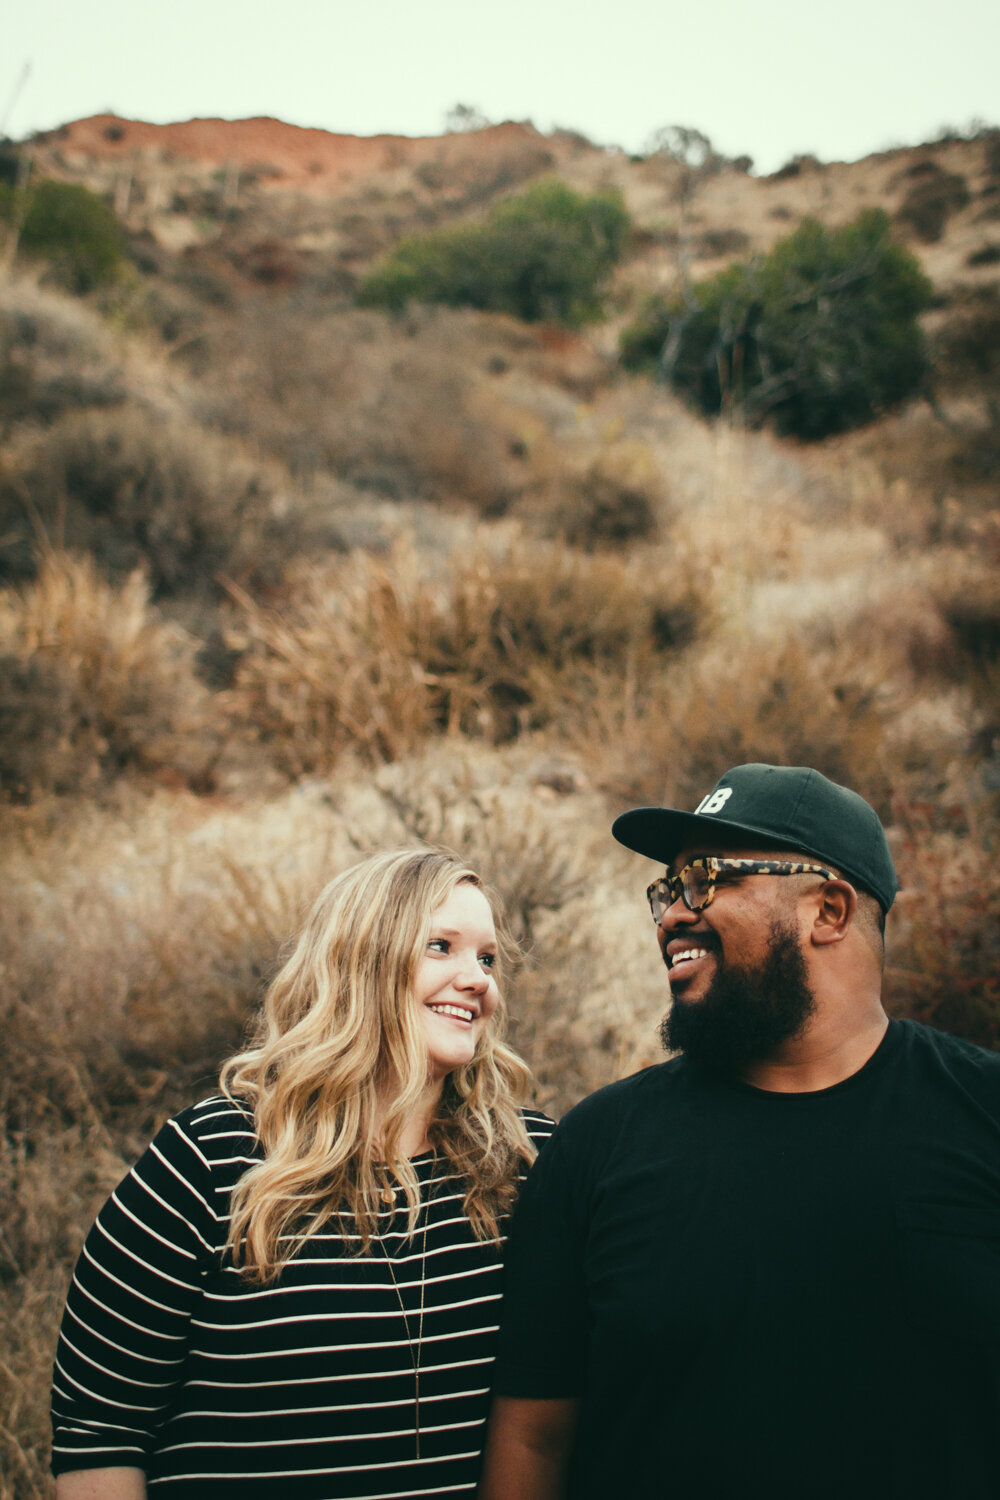 engagement engaged photography photographe marriage wedding photographer corse corsica california desert foothill ranch whiting lifestyle Anza Creative-34.jpg